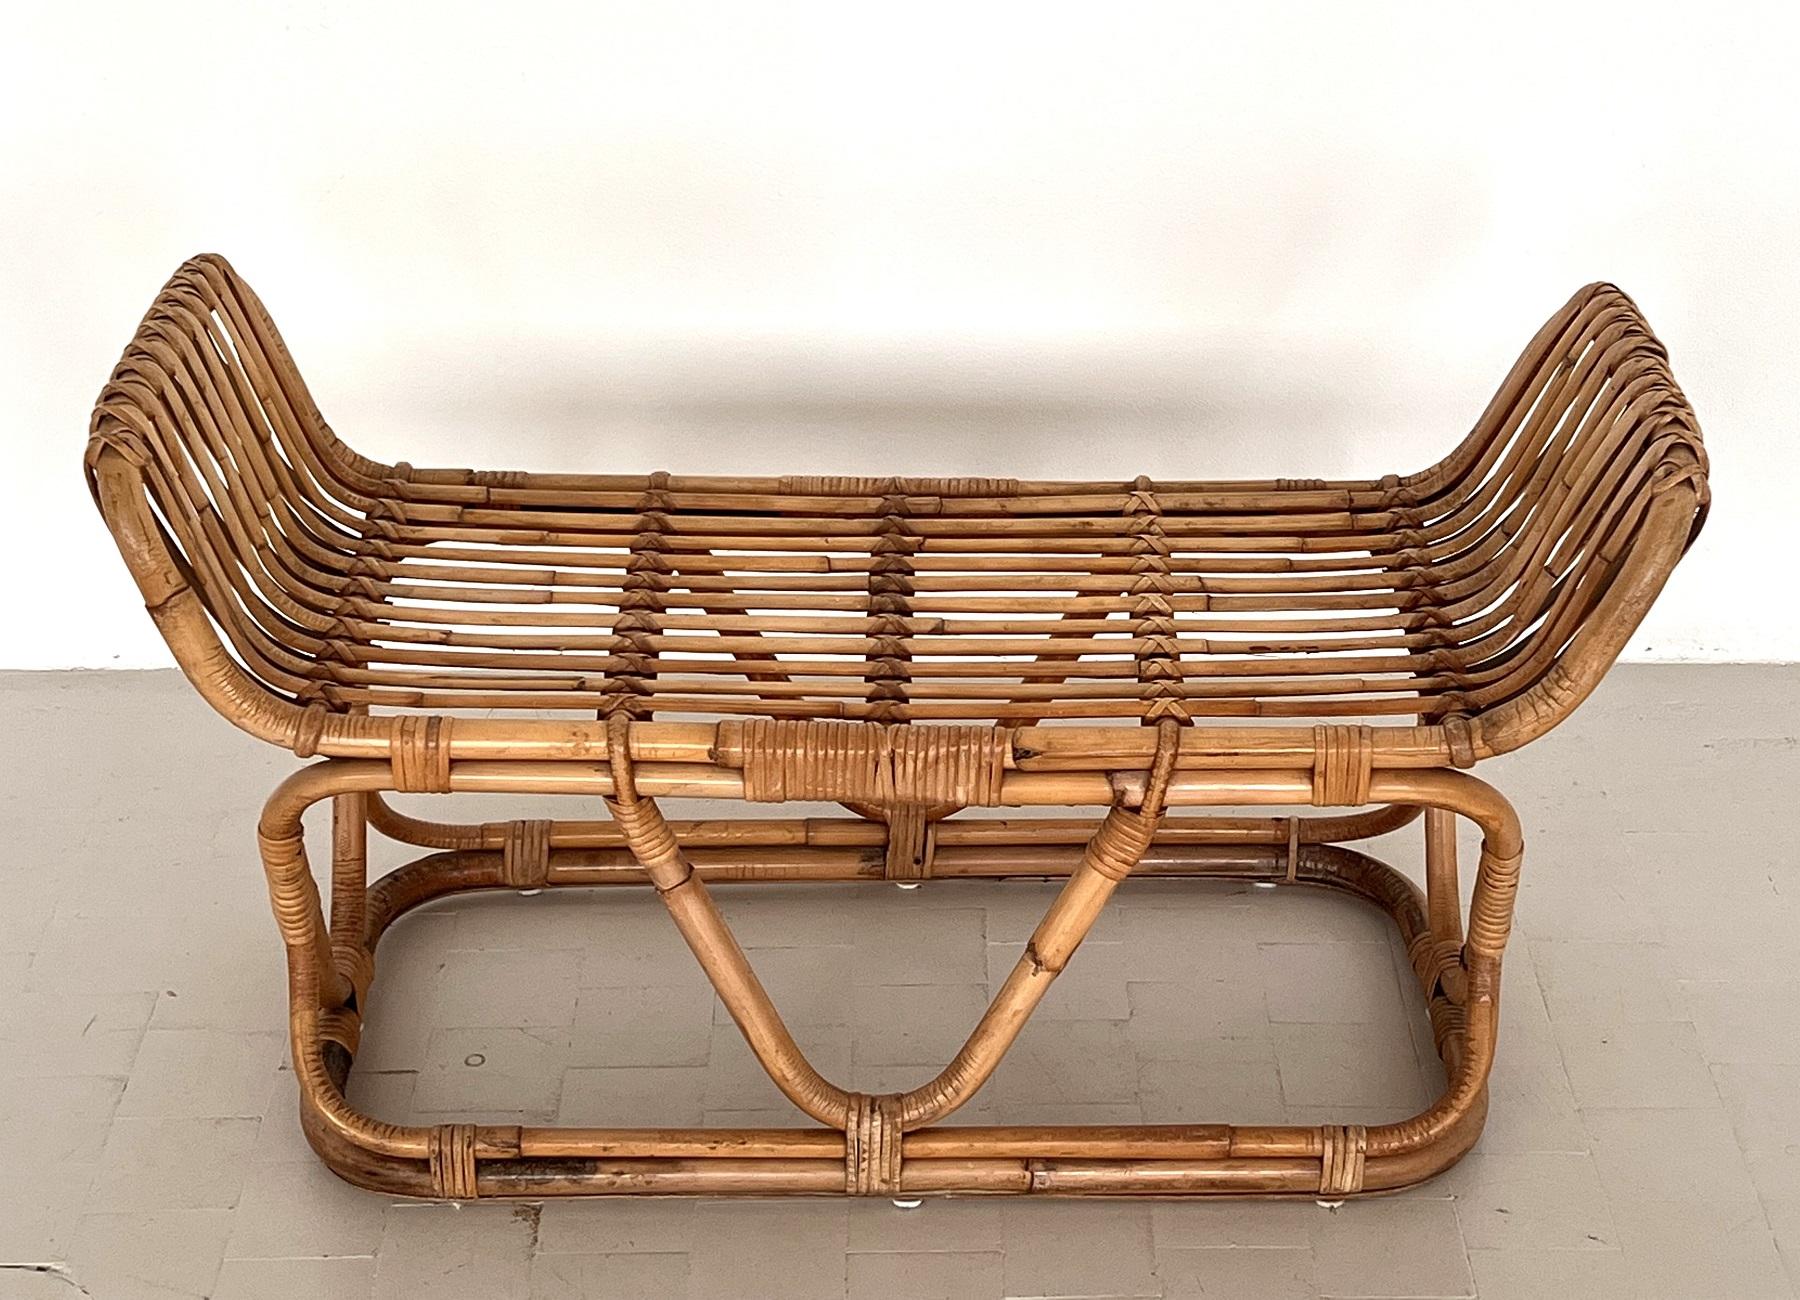 French Provincial Italian Midcentury Organic Rattan Bamboo Bench or Shelf by Tito Agnoli, 1970s For Sale